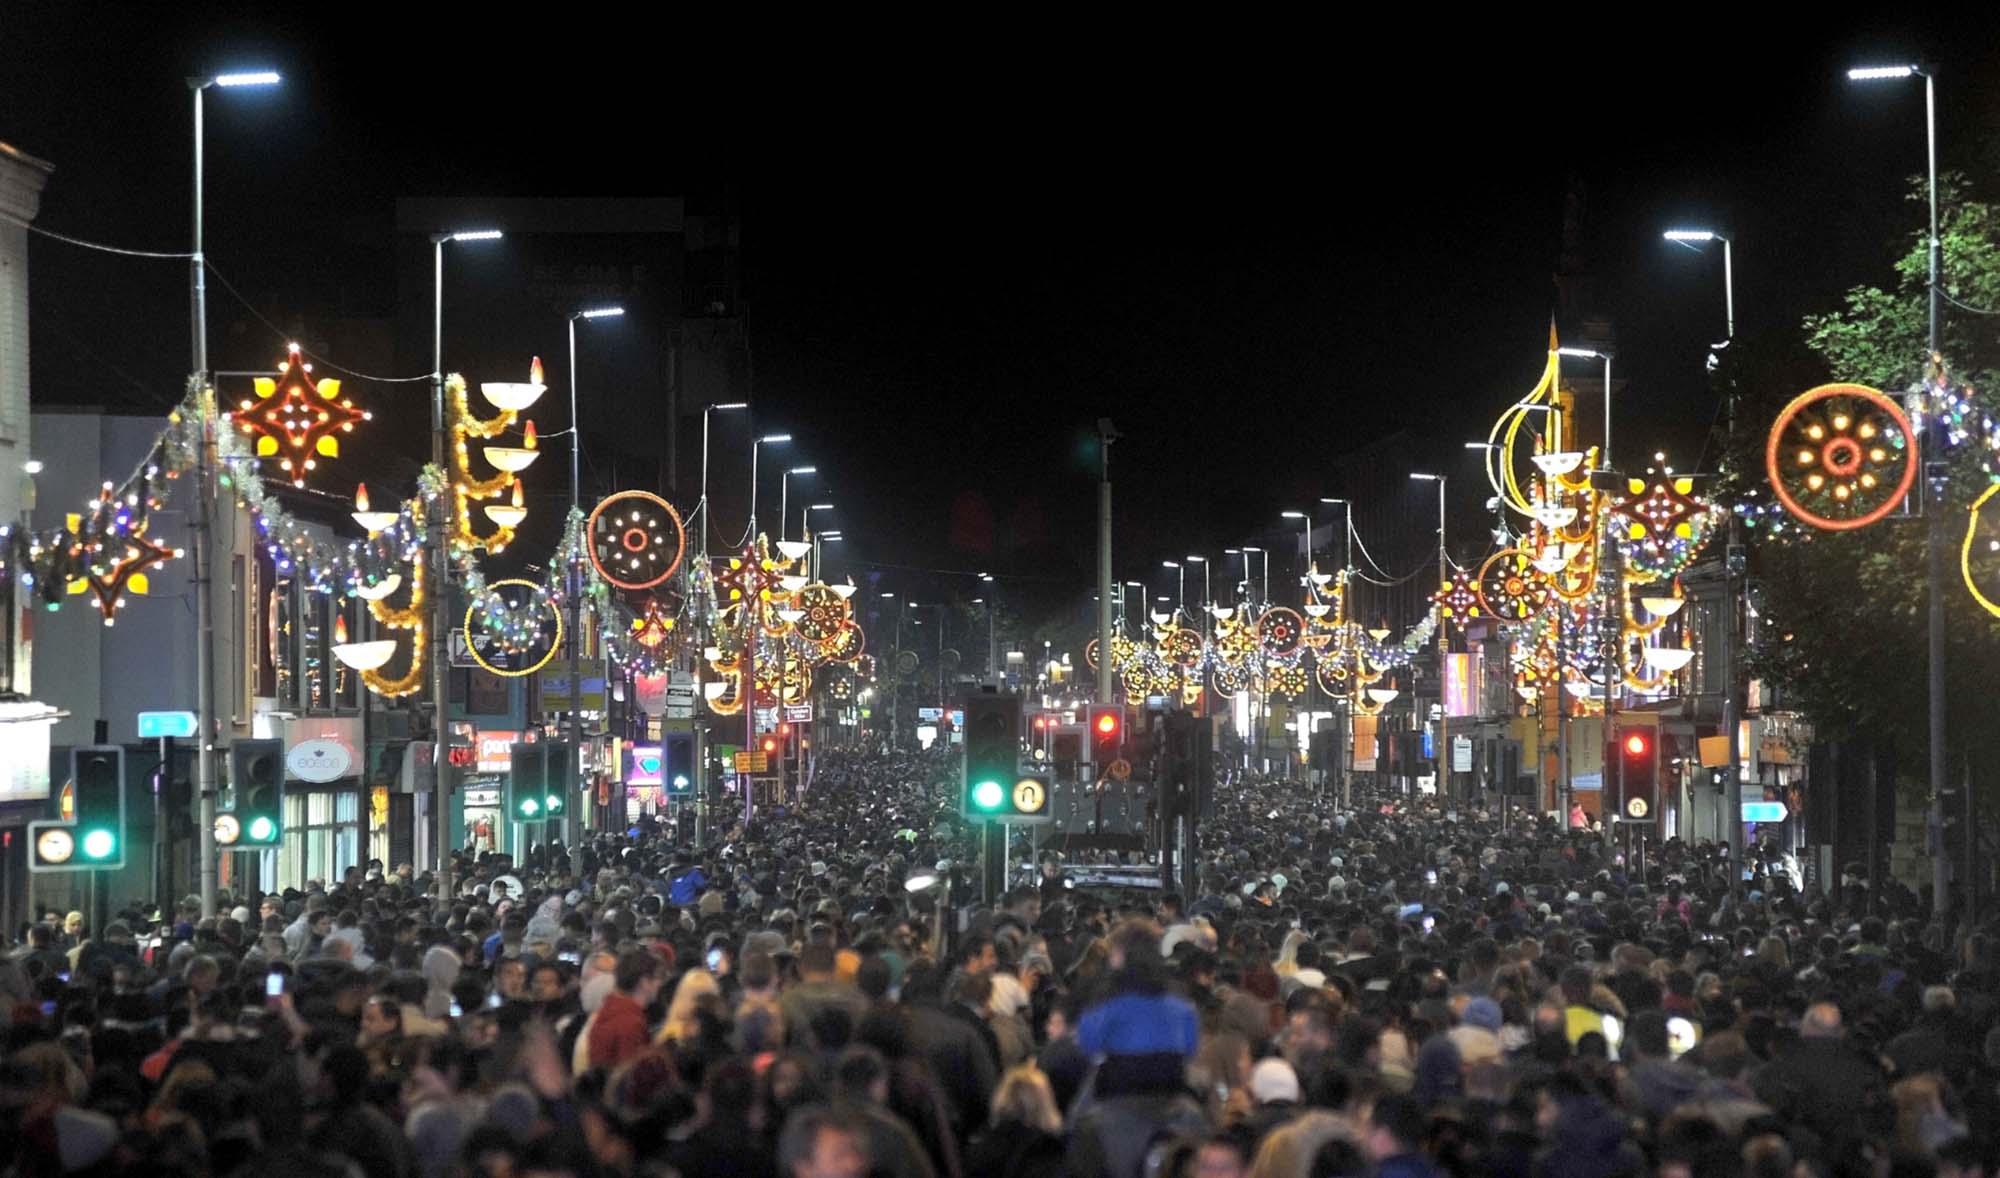 The Leicester Diwali celebrations are the largest outside of India attracting residents and tourists from all over the UK -